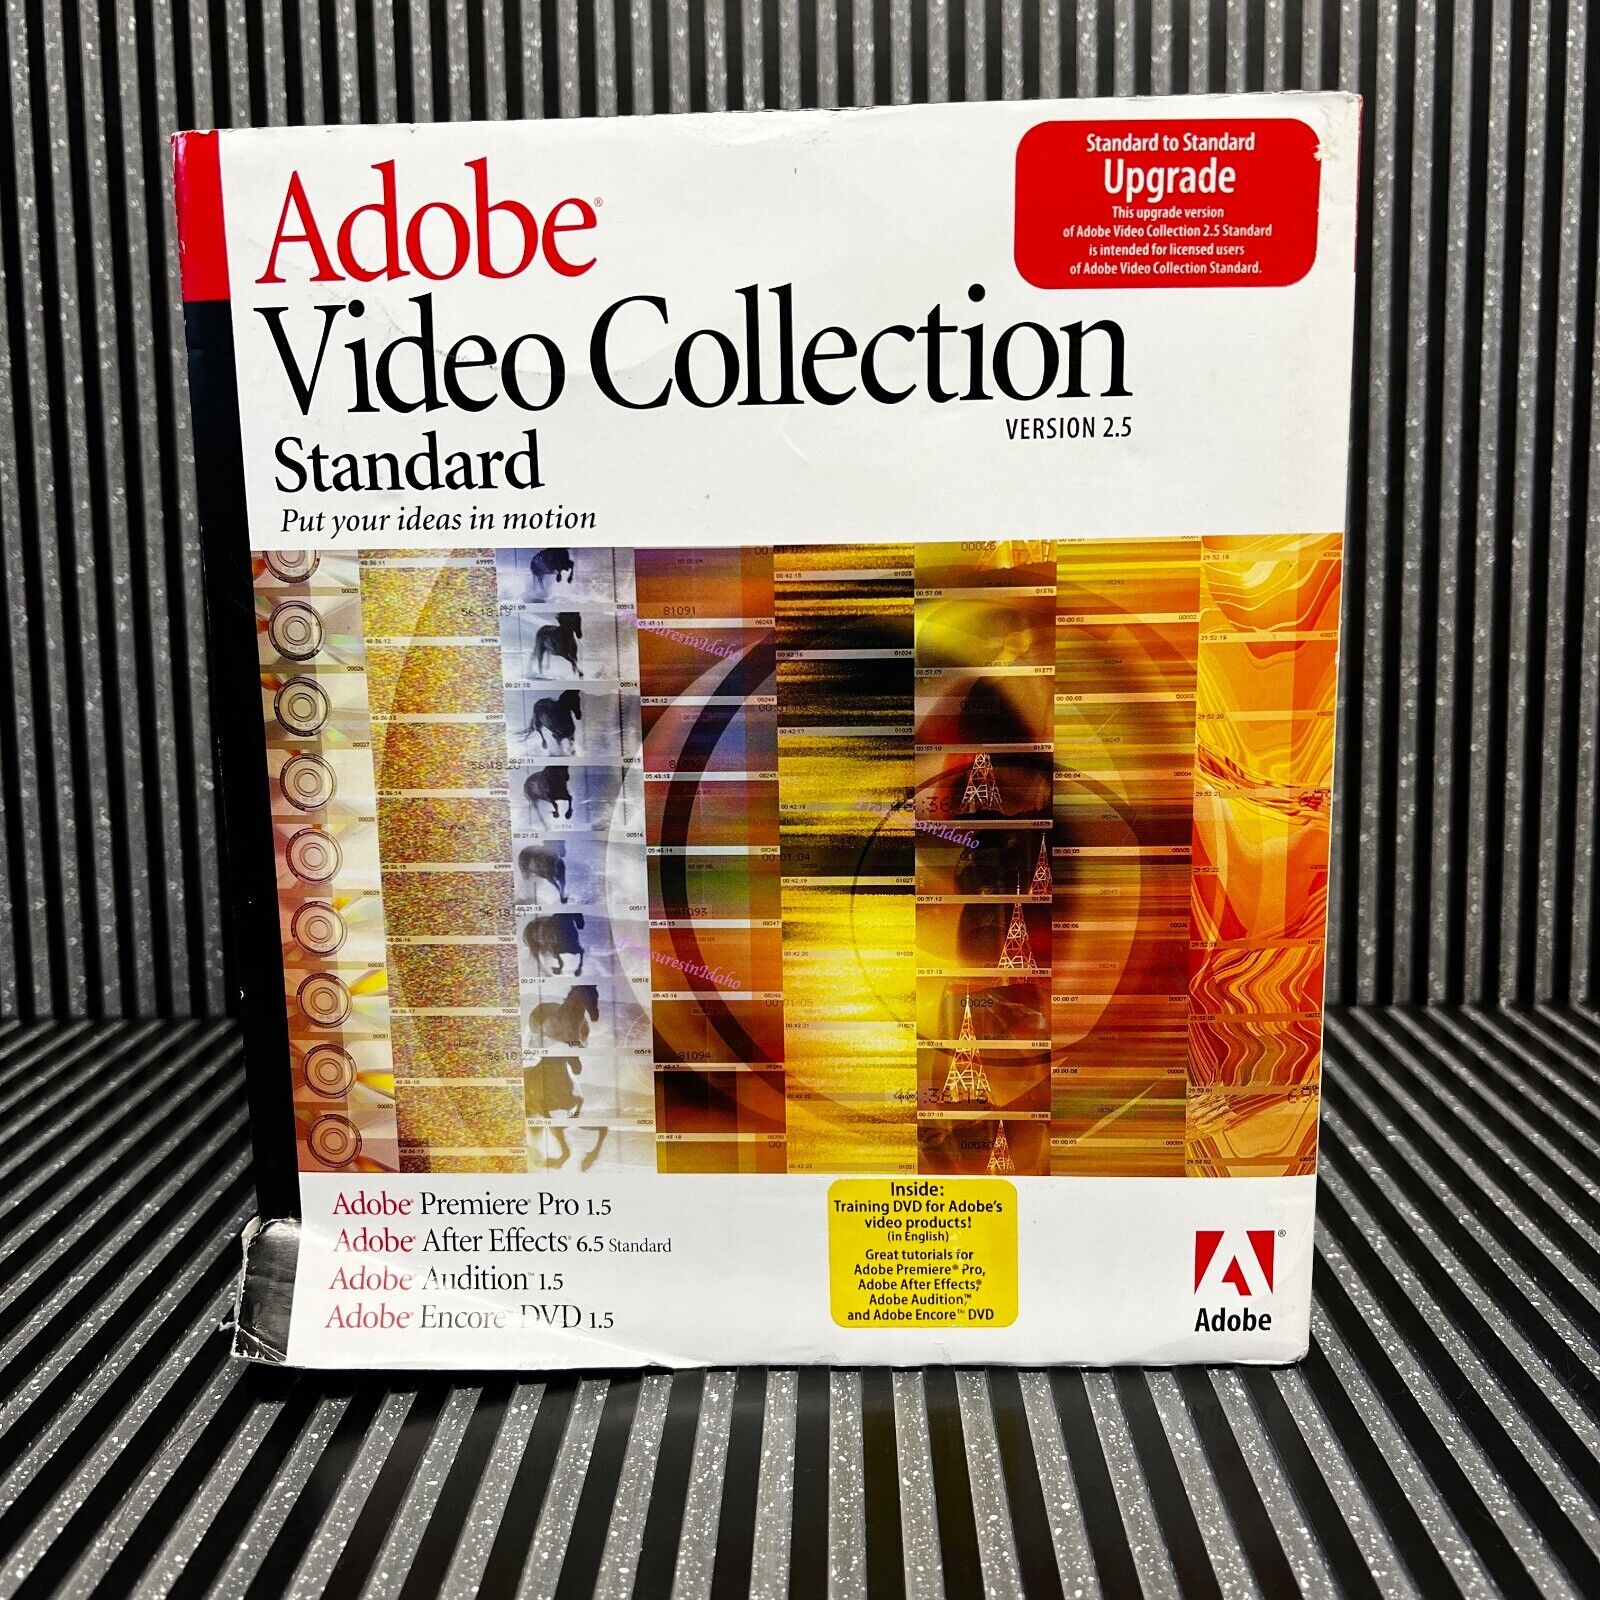 Adobe Video Collection Standard Version 2.5 with Books and CD's & serial numbers